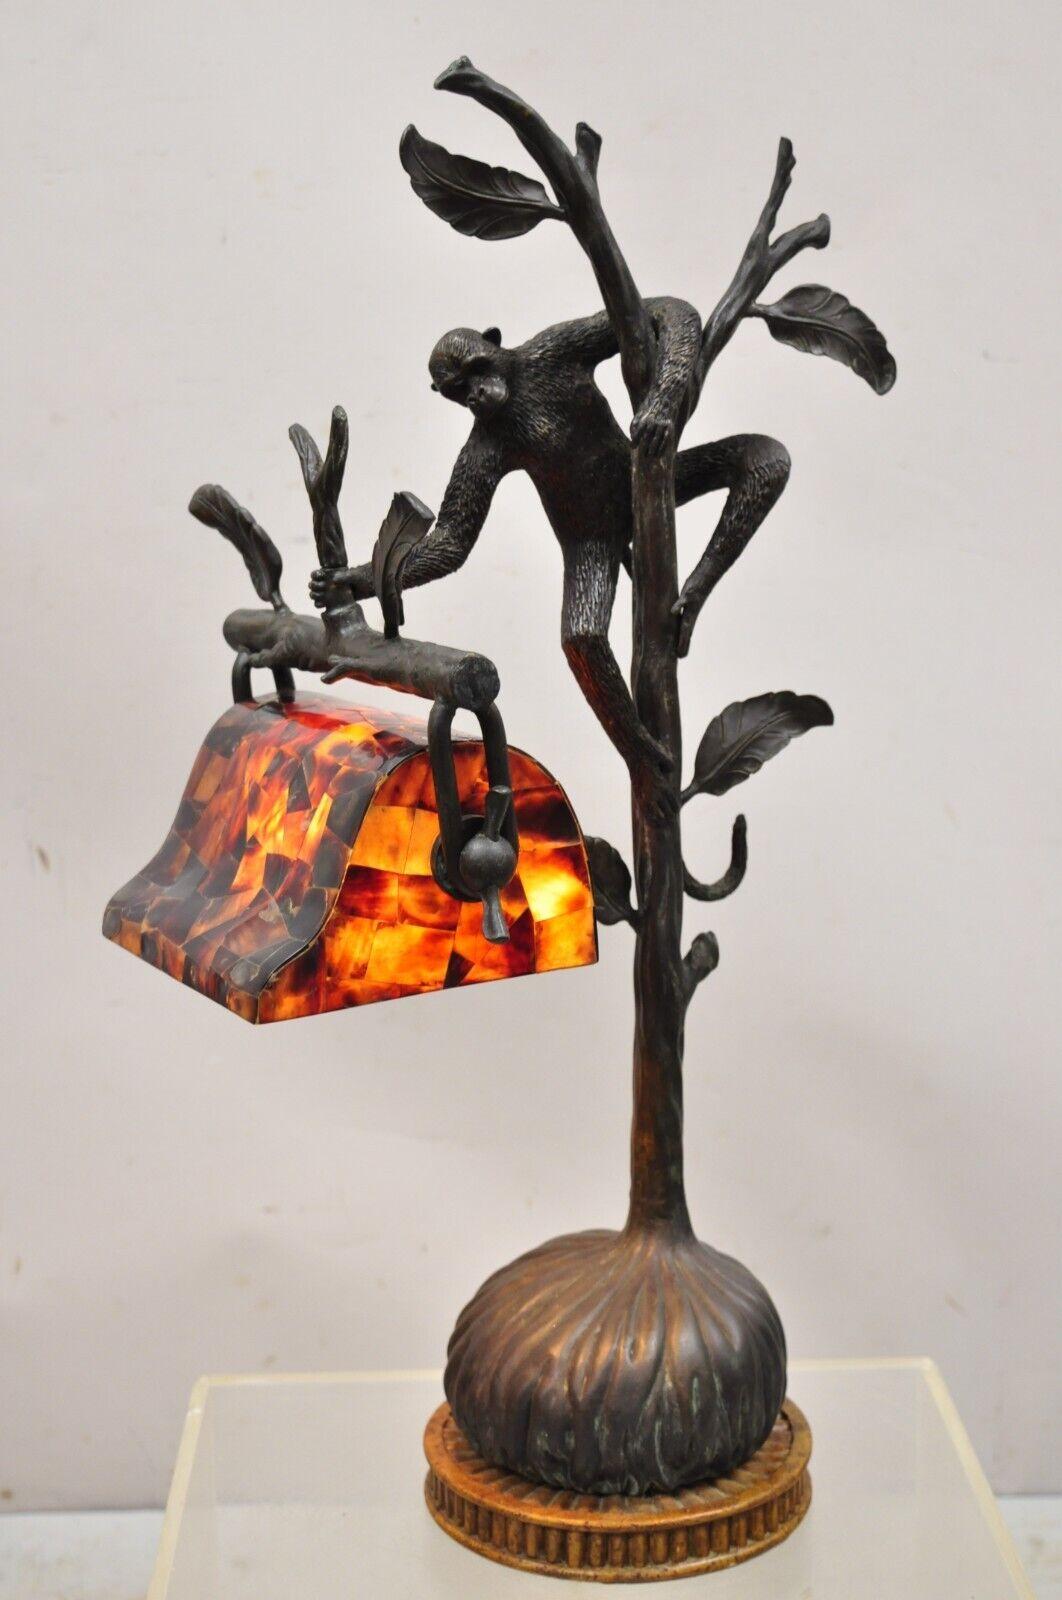 Maitland Smith figural bronze monkey desk lamp with pen shell shade. Item features original pen shell shade, cast bronze figural base with monkey on tree/branch, original label, very nice vintage item, quality craftsmanship, great style and form.